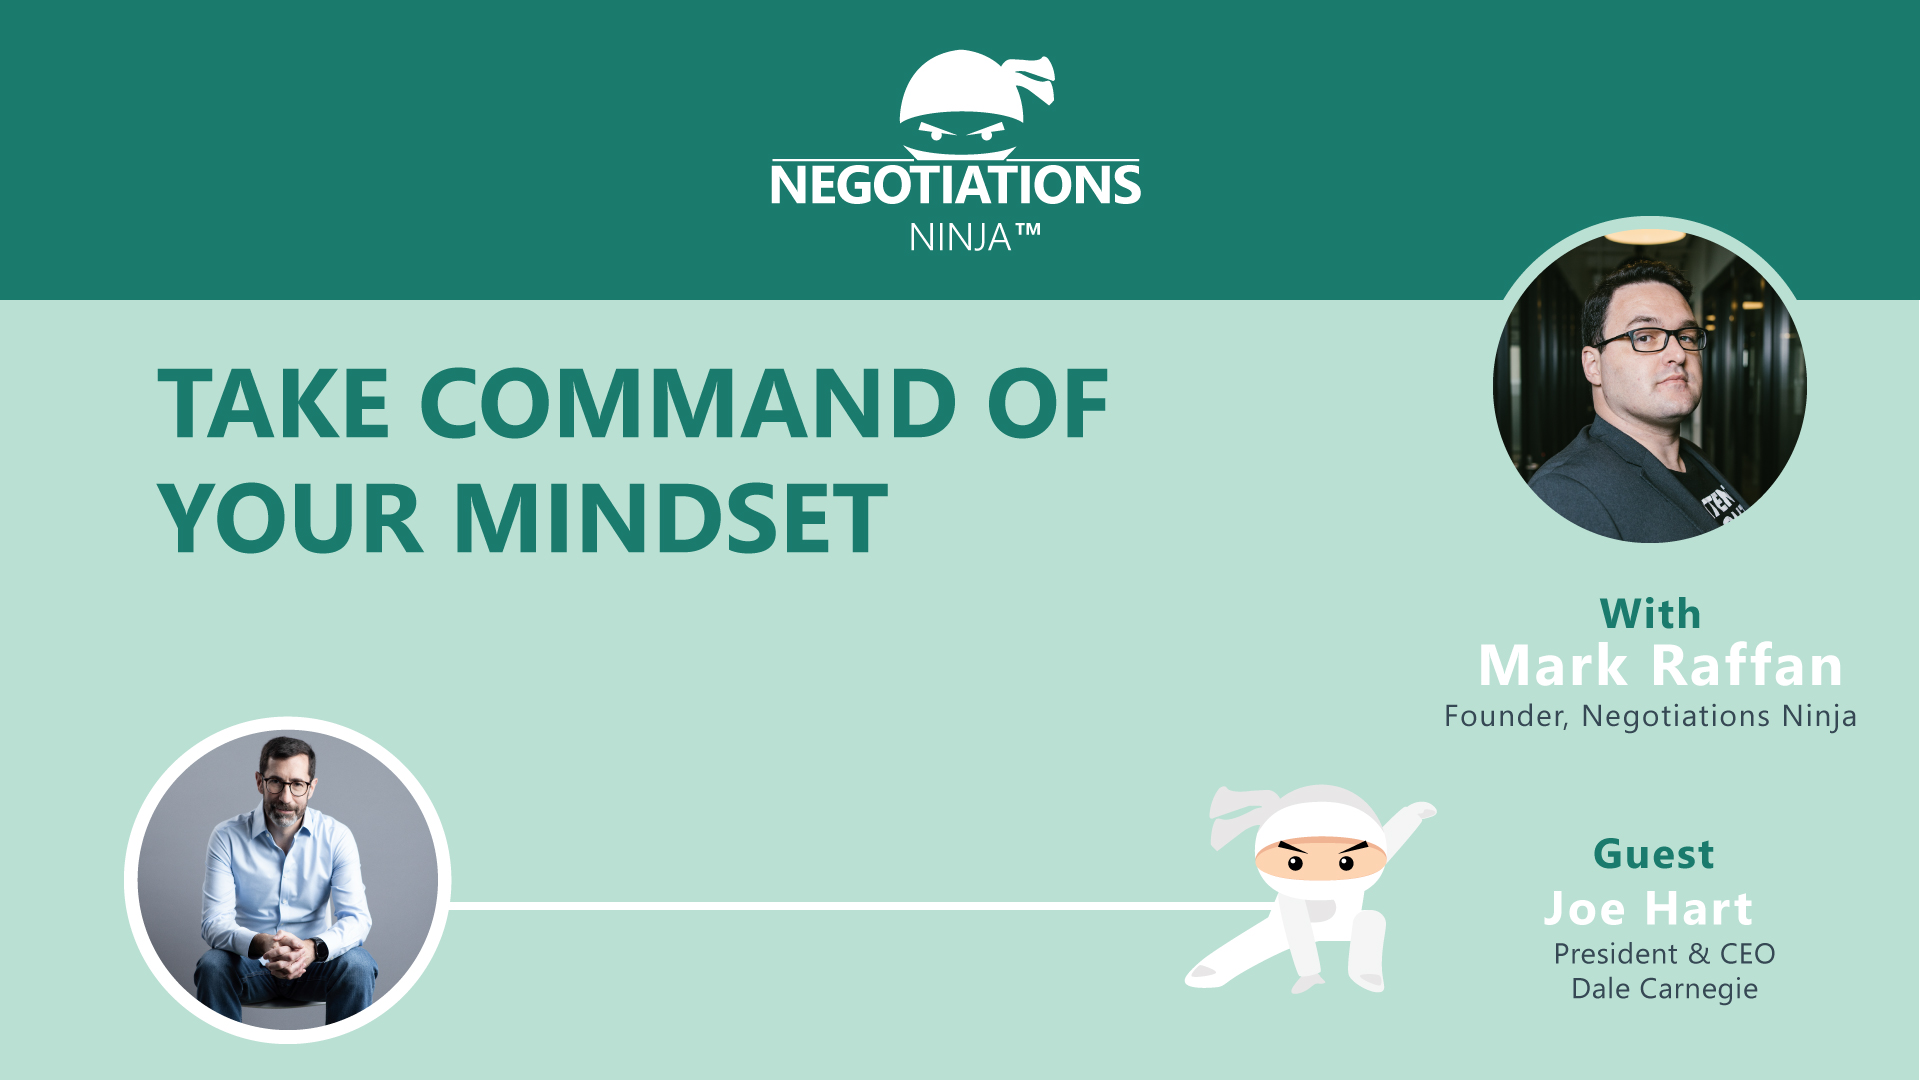 Take command of your mindset